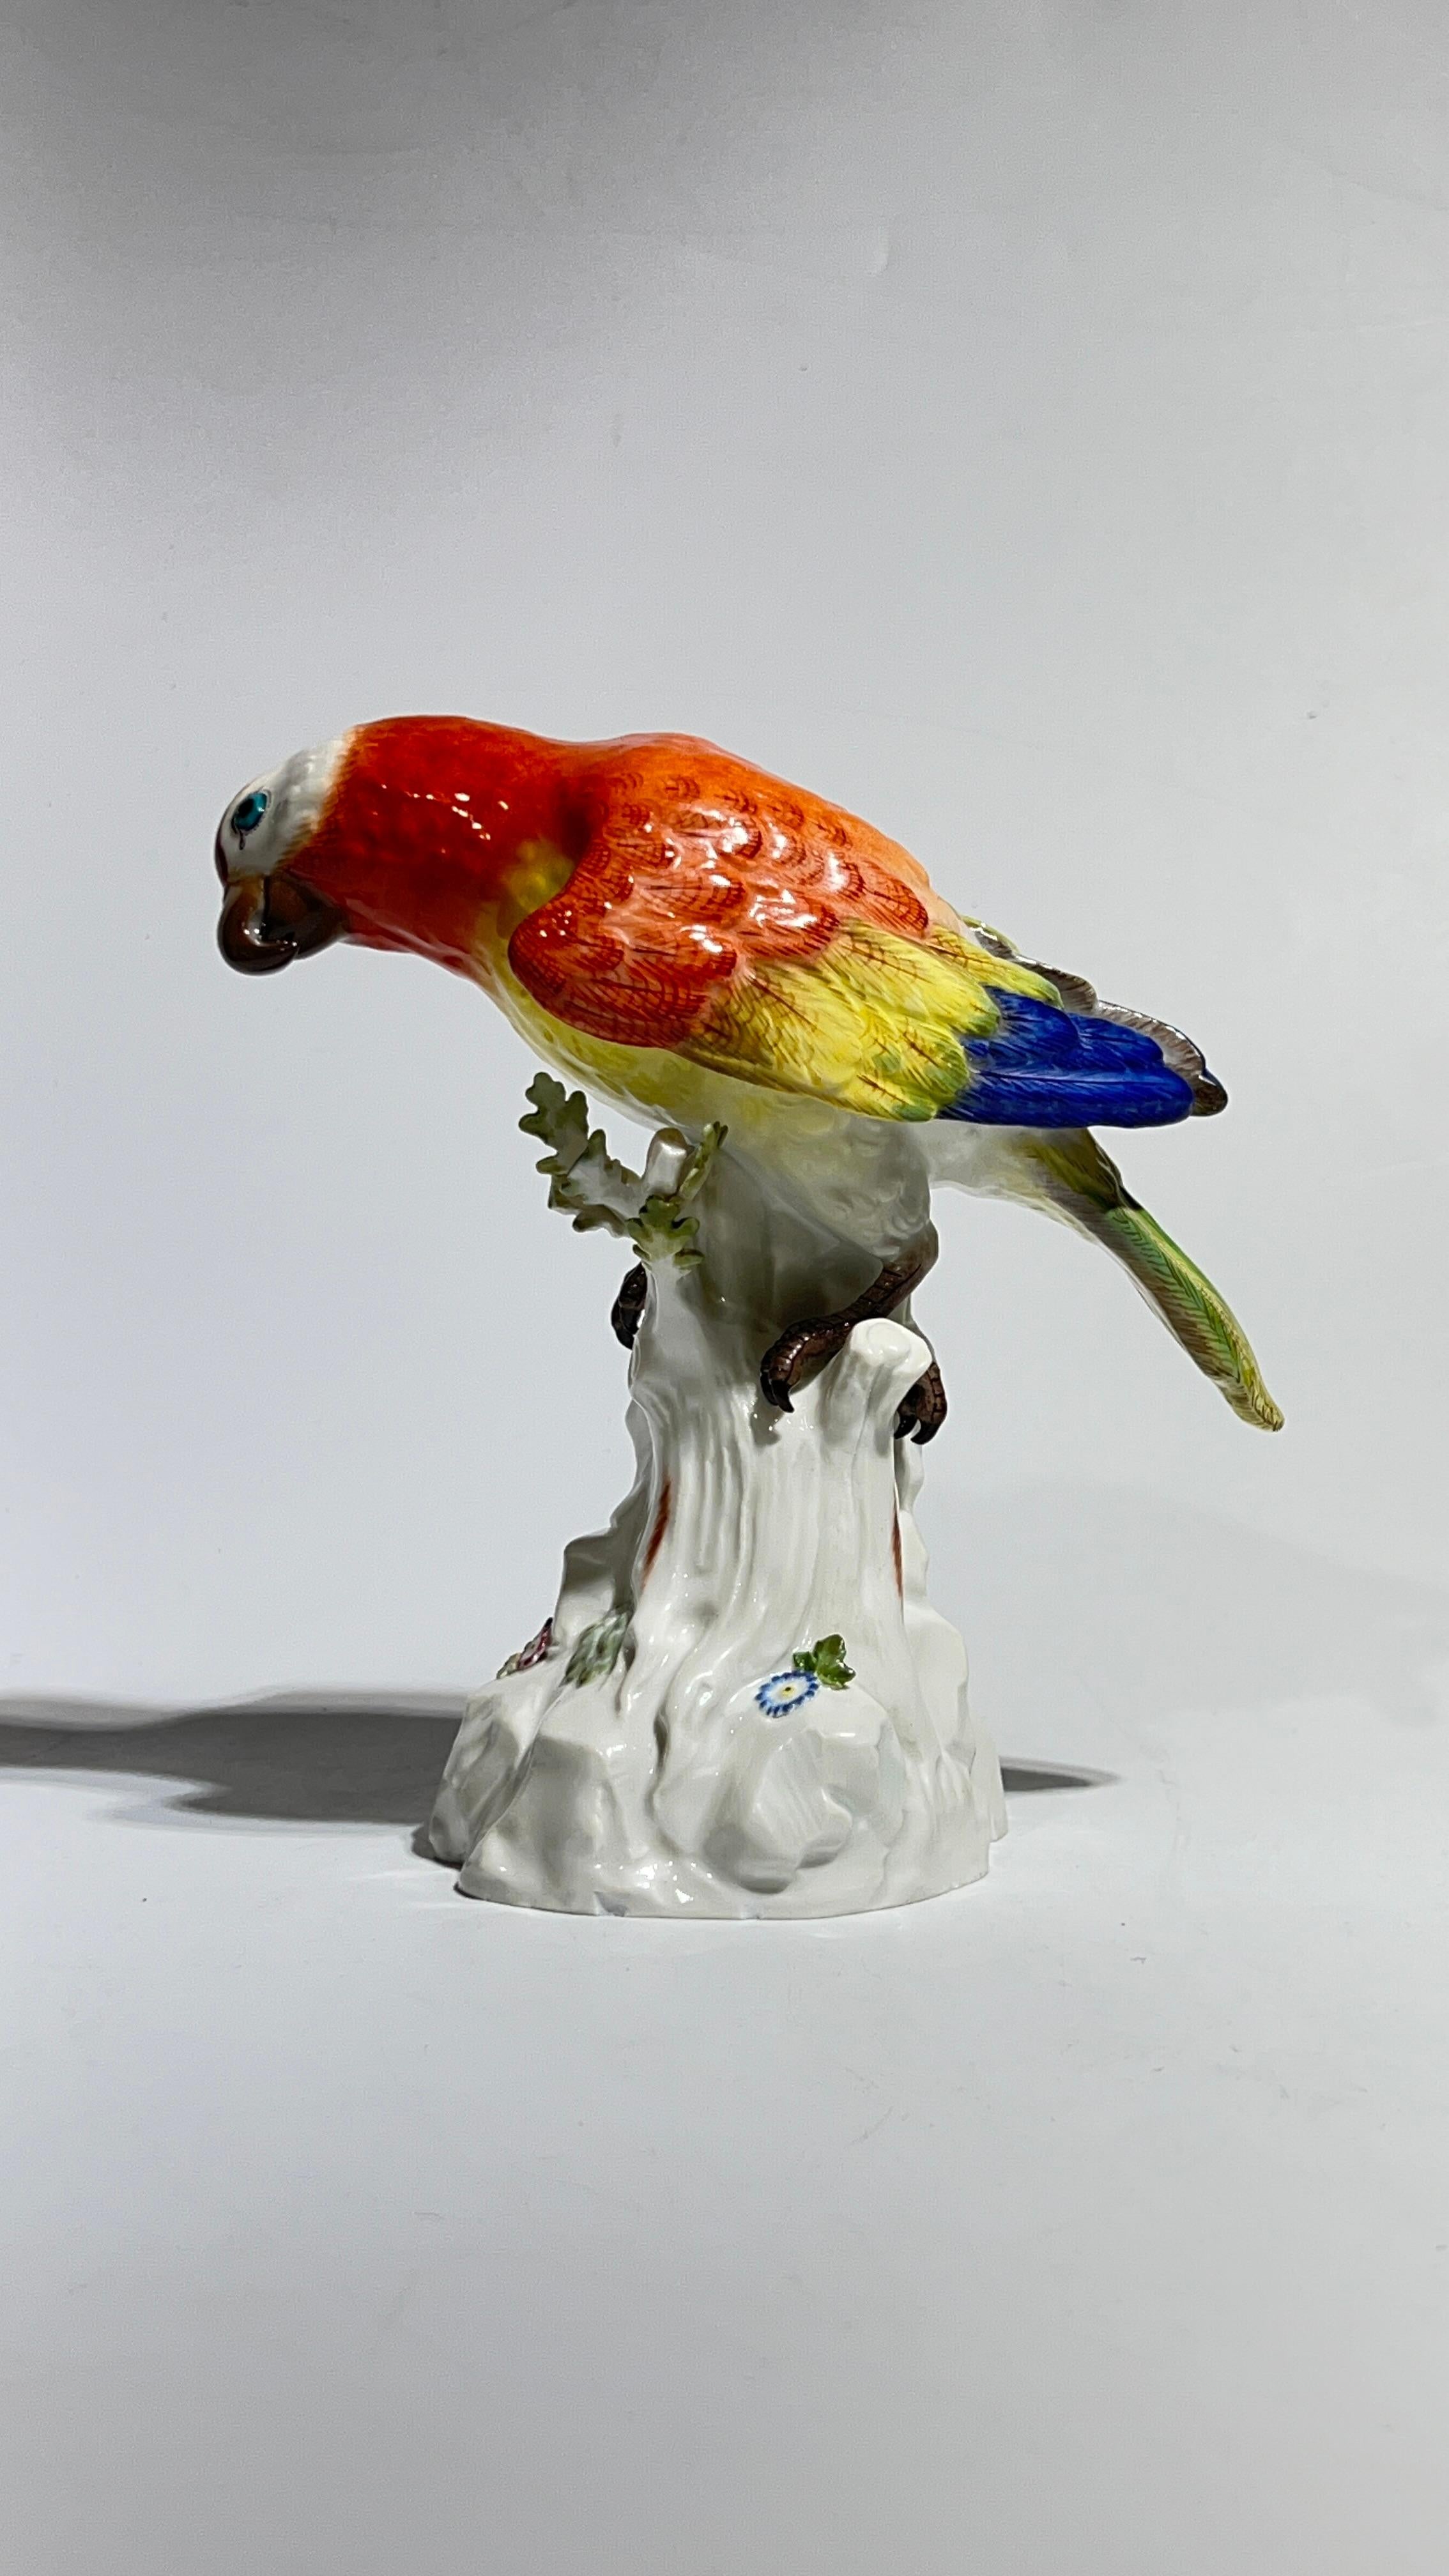 Antique (late 19th century) polychrome glazed porcelain figurine of a parrot from Meissen.  In excellent condition with professional restoration to the tail and otherwise no losses.